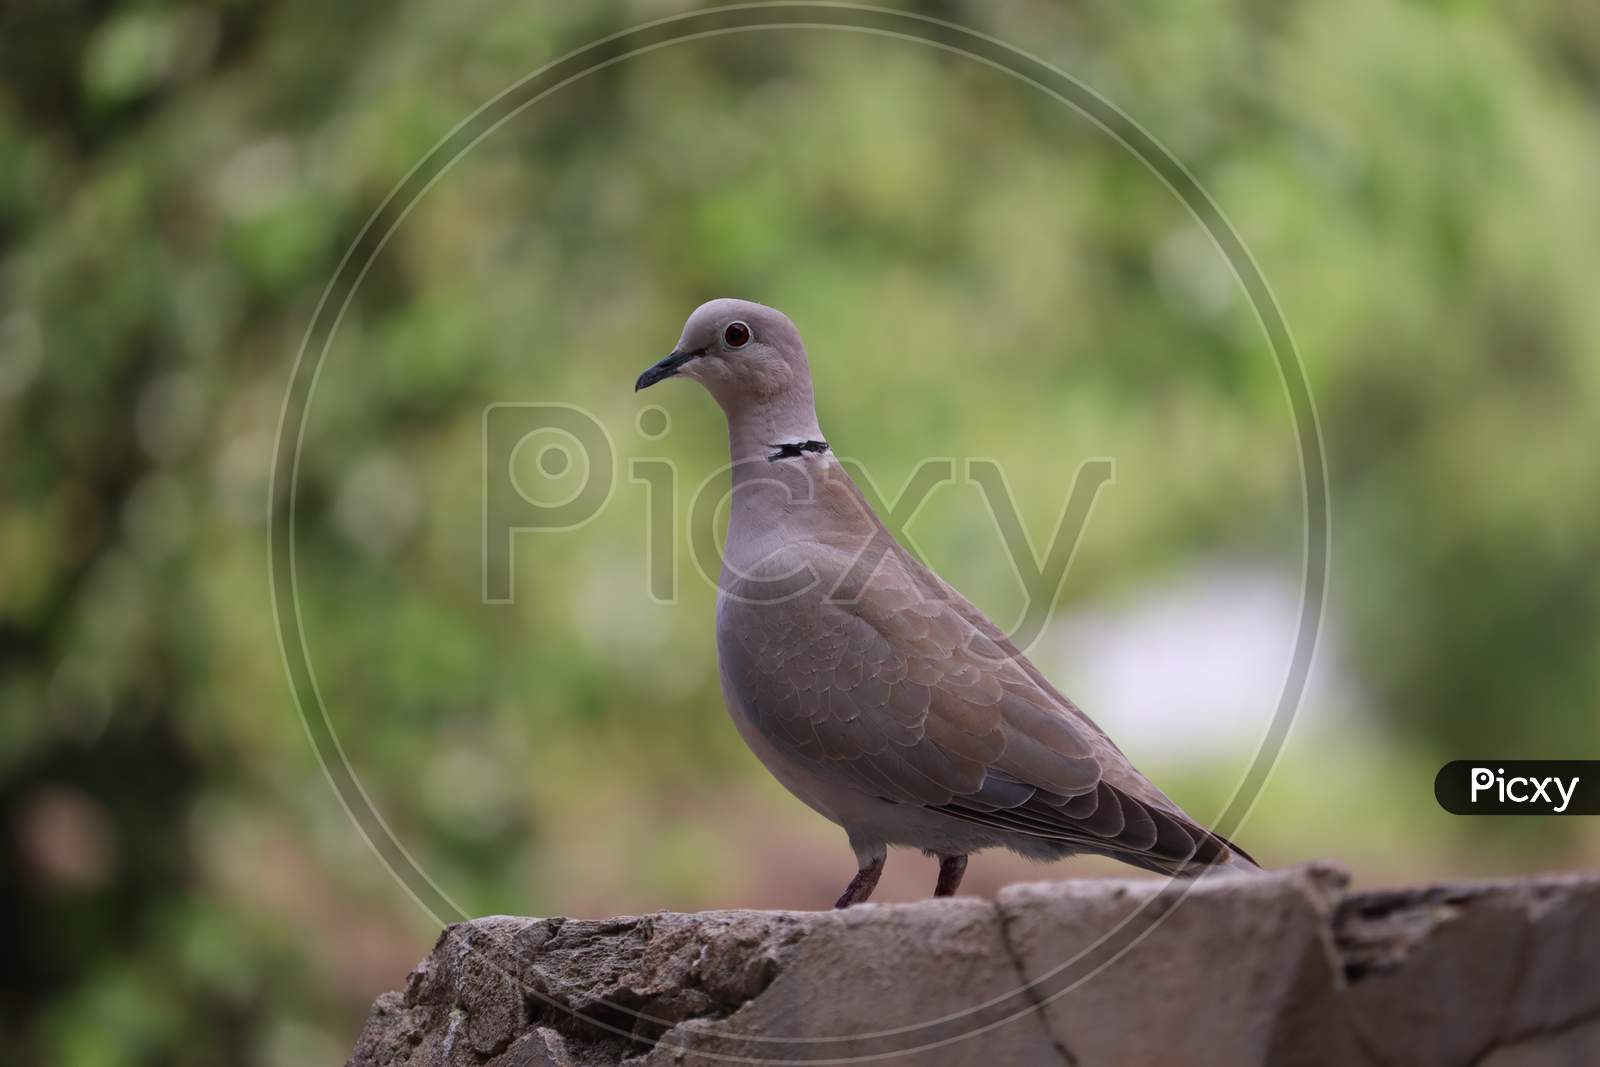 Dove (Pigeon) On The Rock Surface. Rajasthan, India